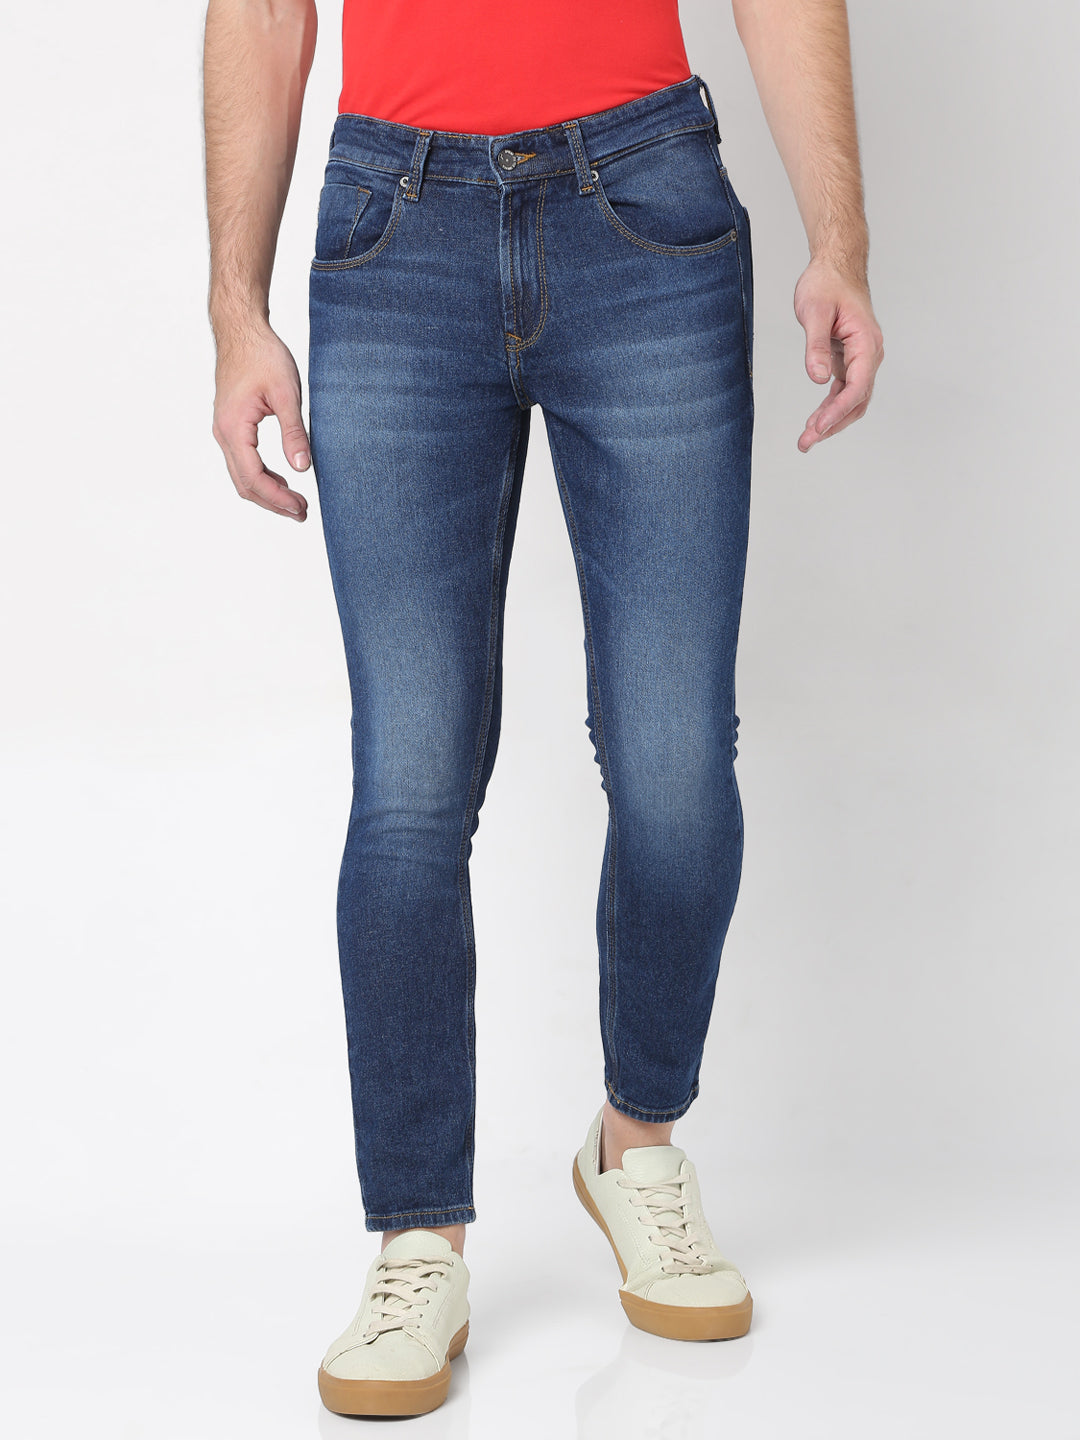 Men Jeans  Buy Jeans for Men in India at best prices  Myntra